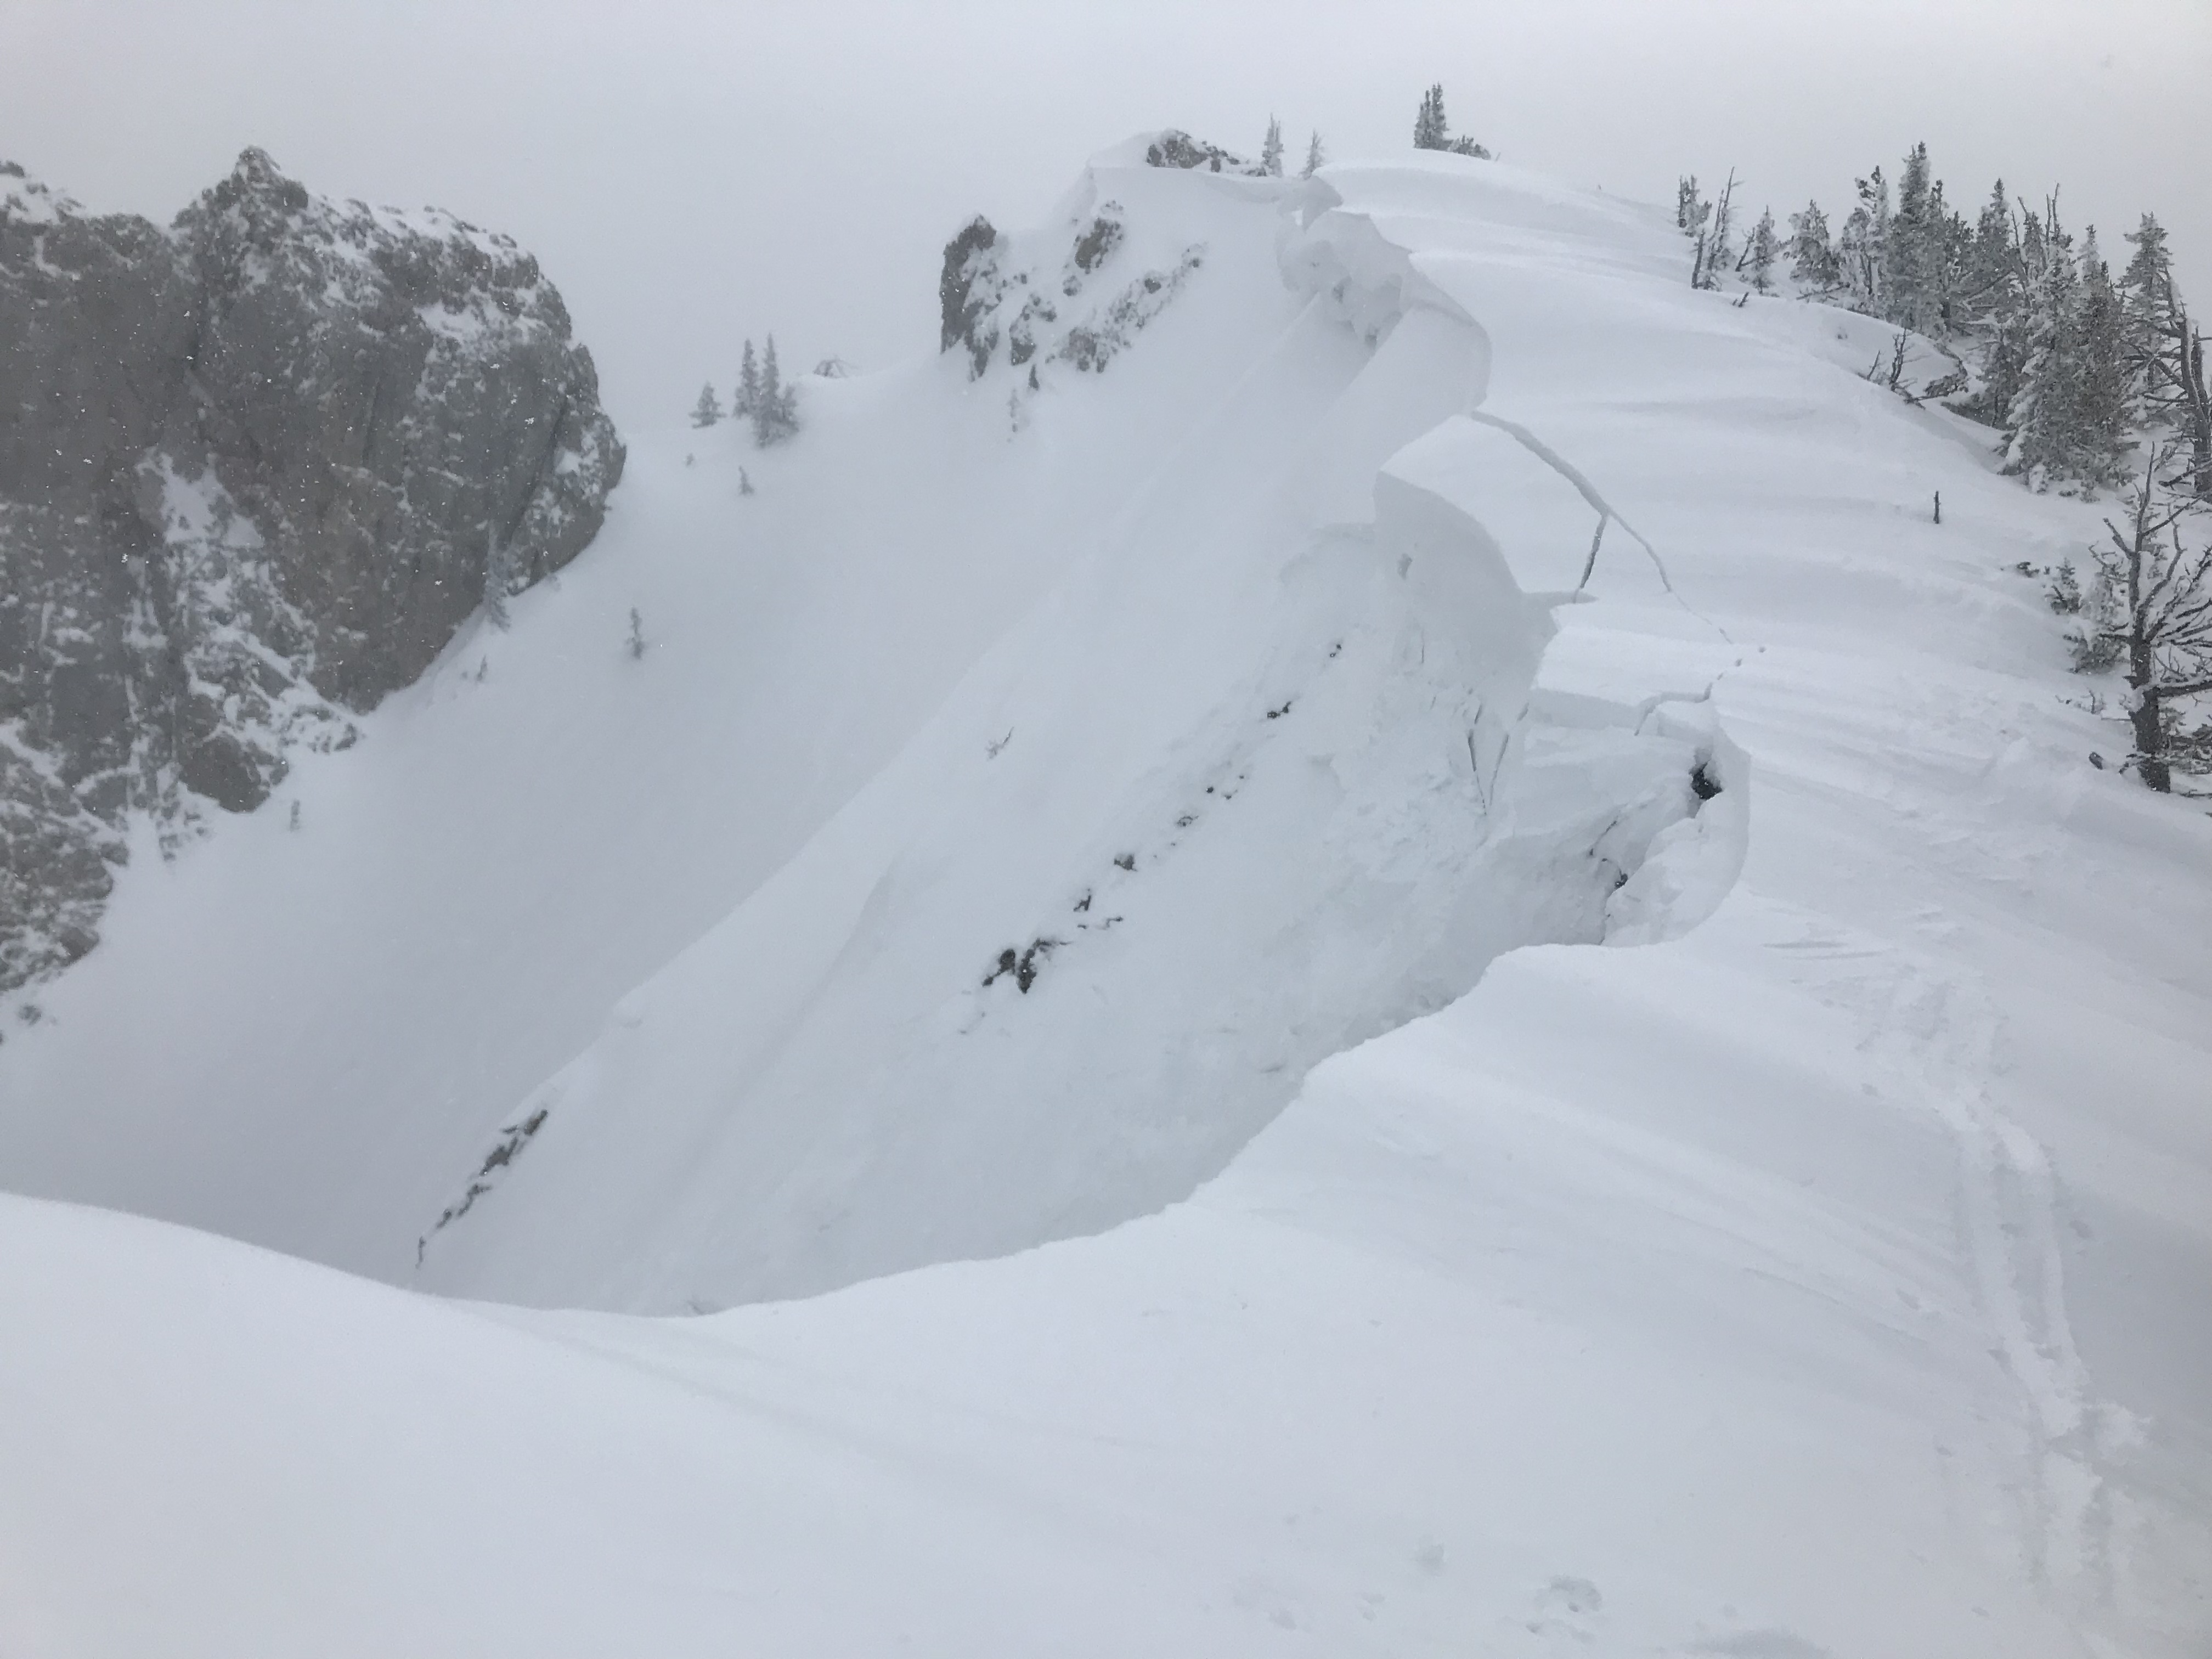 Cornice Triggered In Hourglass Chute Gallatin National Forest